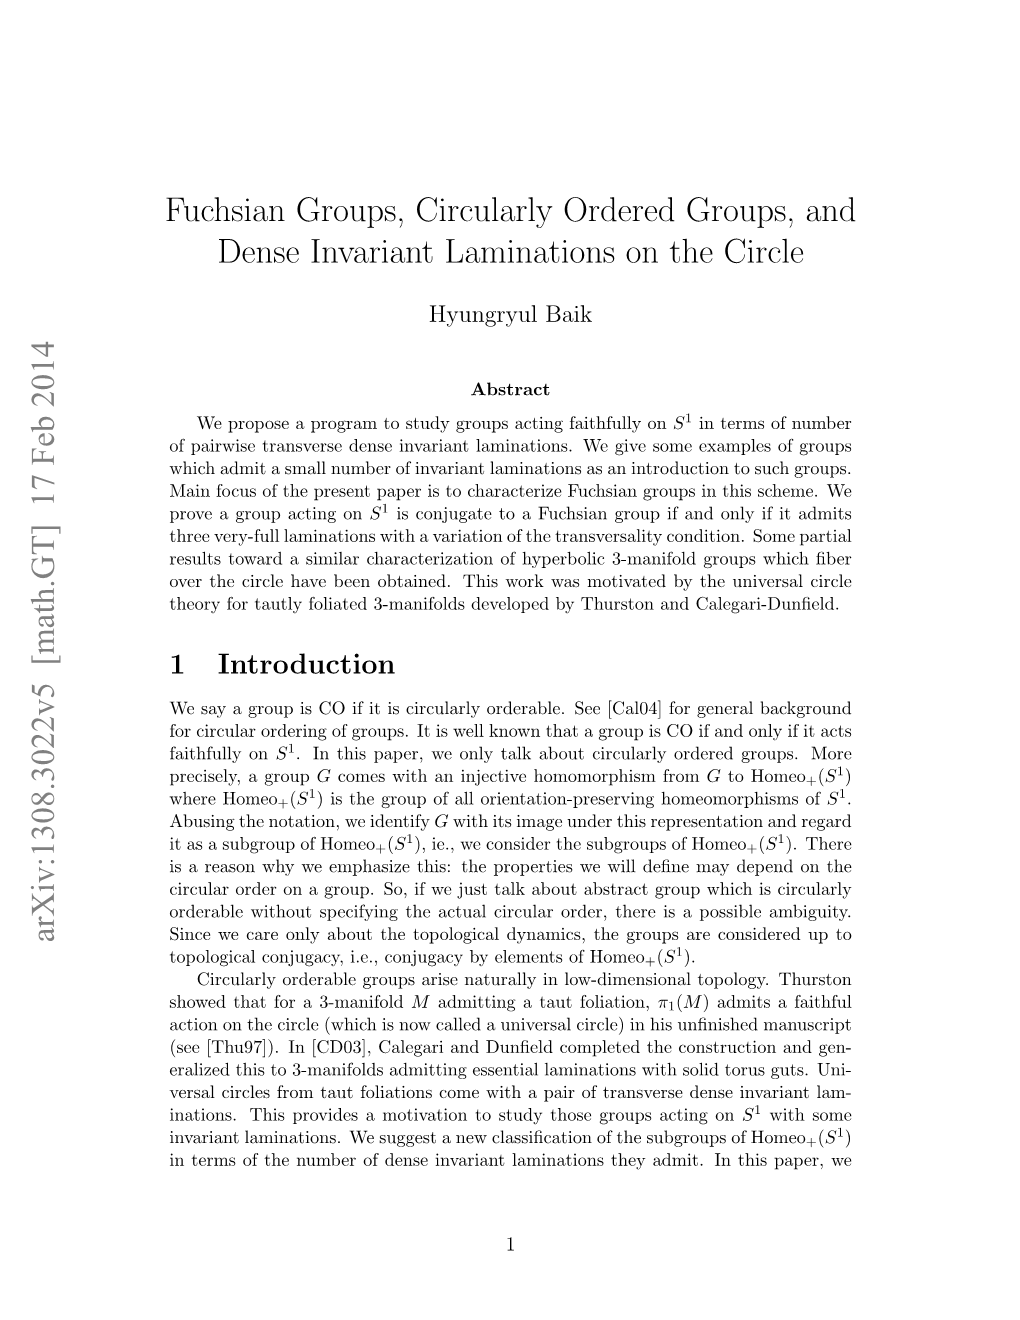 Fuchsian Groups, Circularly Ordered Groups, and Dense Invariant Laminations on the Circle